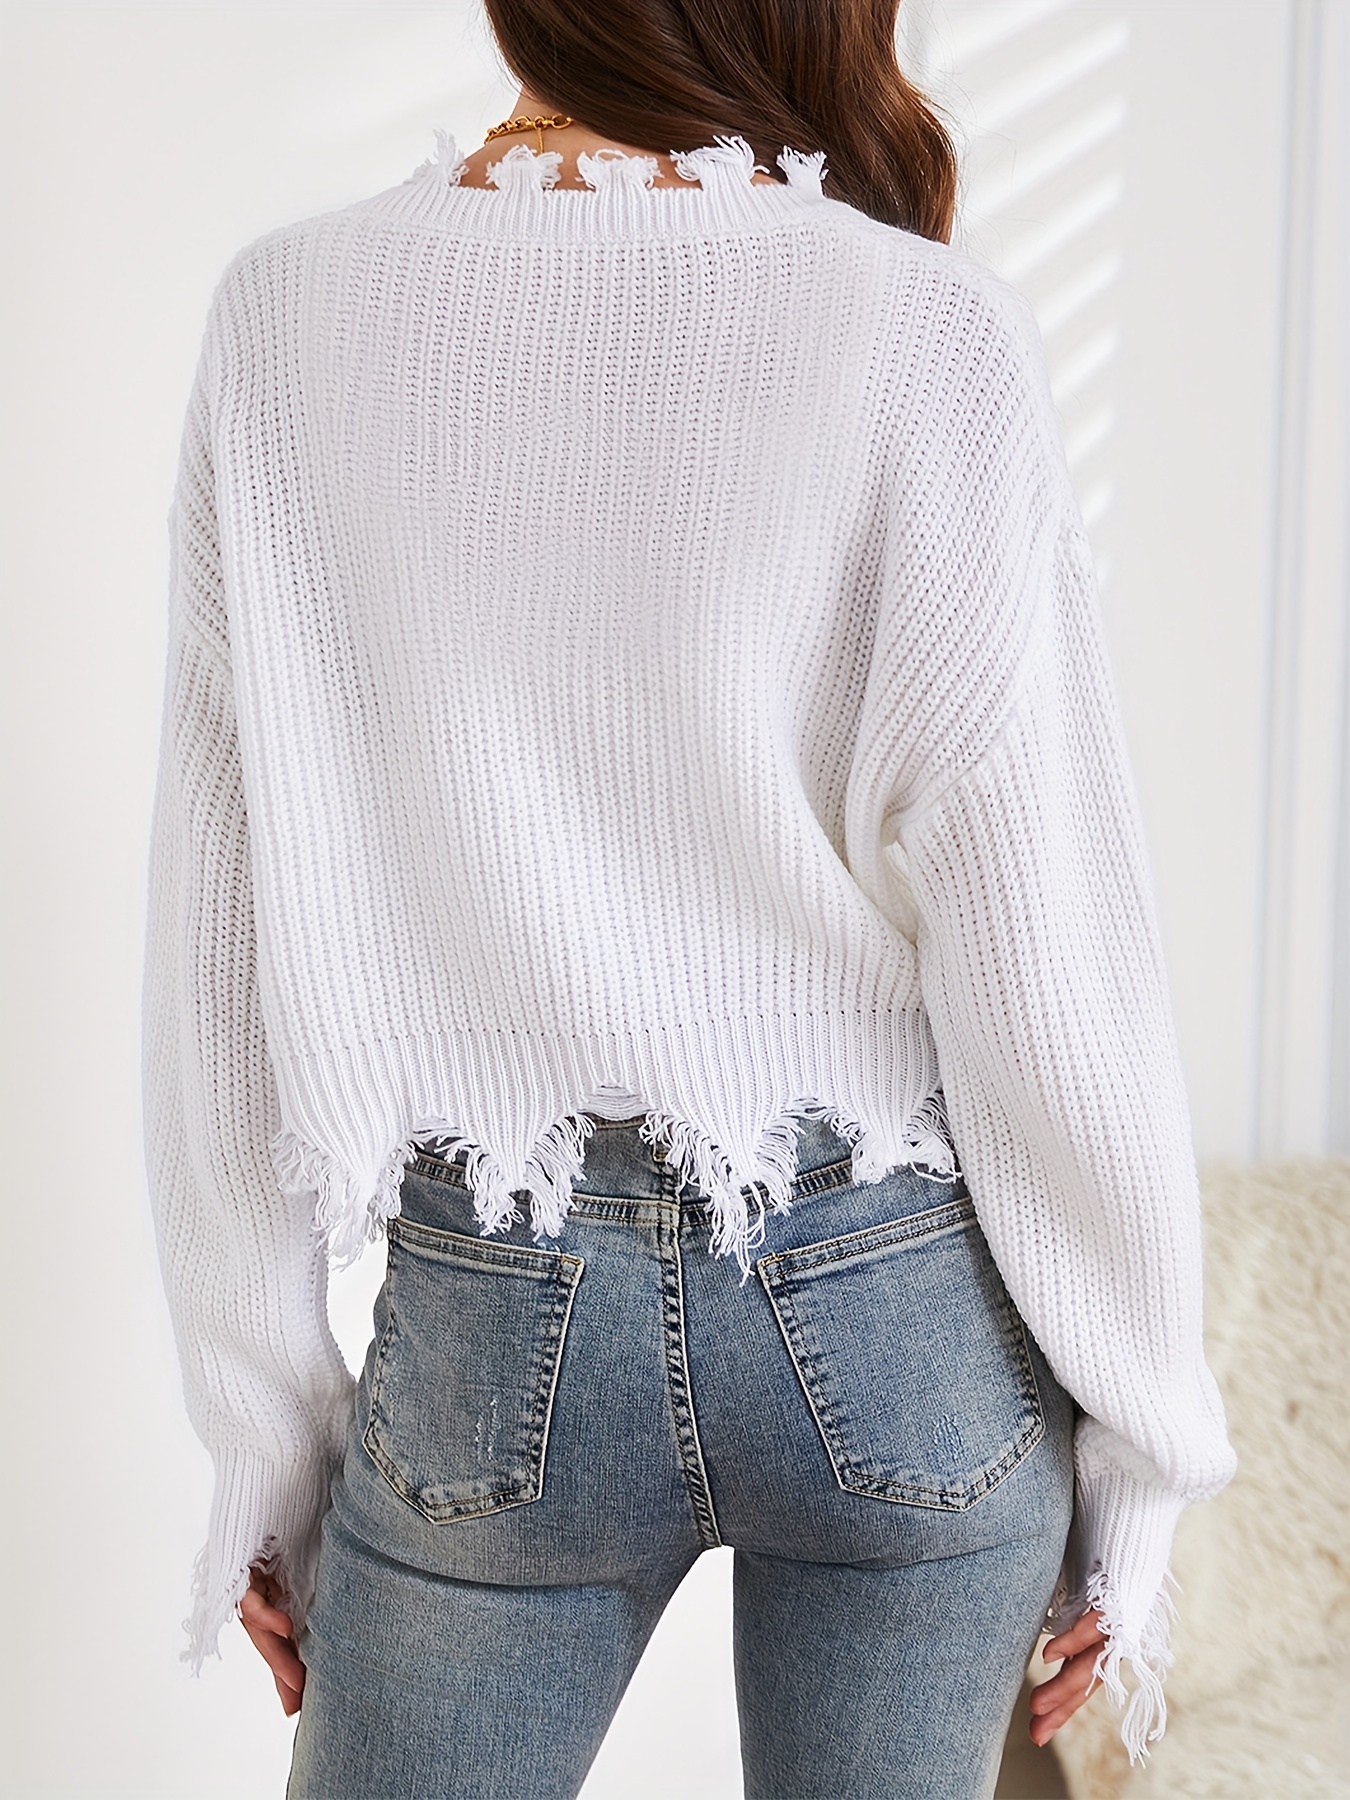 Casual weekend outfit: Grey lace hem sweater, distressed denim and